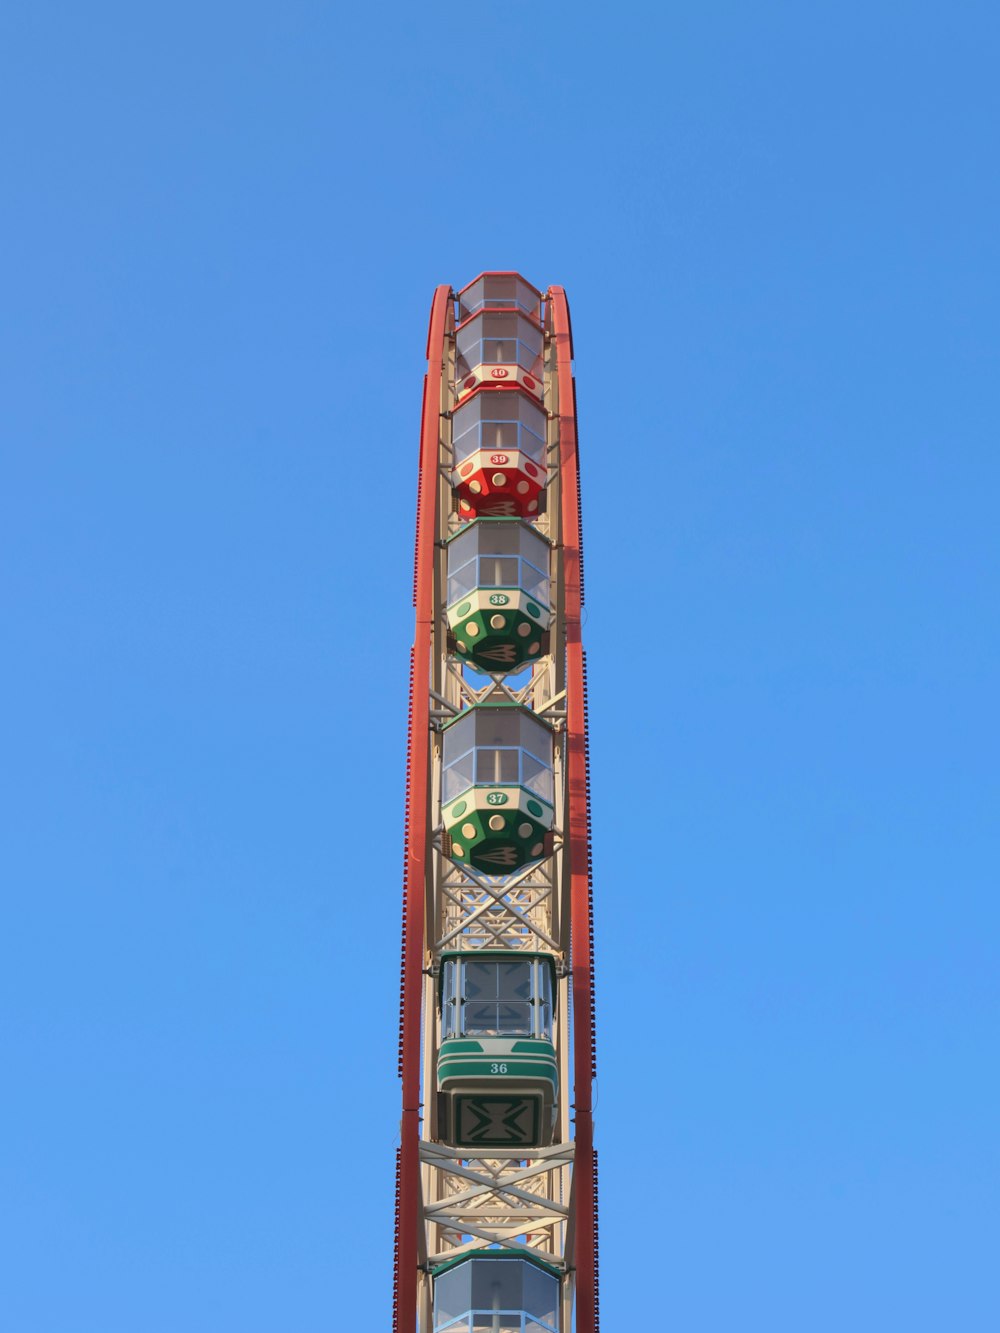 a ferris wheel on a clear day with a blue sky